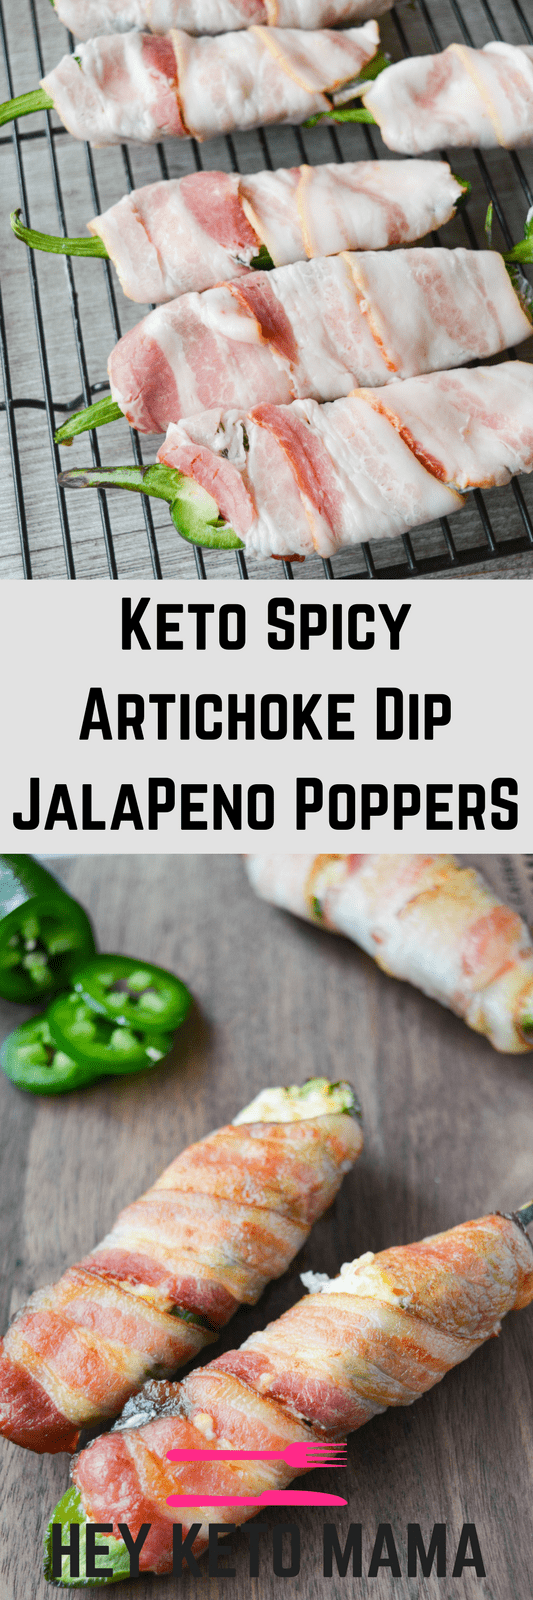 These Keto Spicy Artichoke Dip Jalapeno Poppers definitely raise the bar. They are an easy, delicious, one-way ticket to an incredible flavor adventure that you won't want to come back from anytime soon! | heyketomama.com